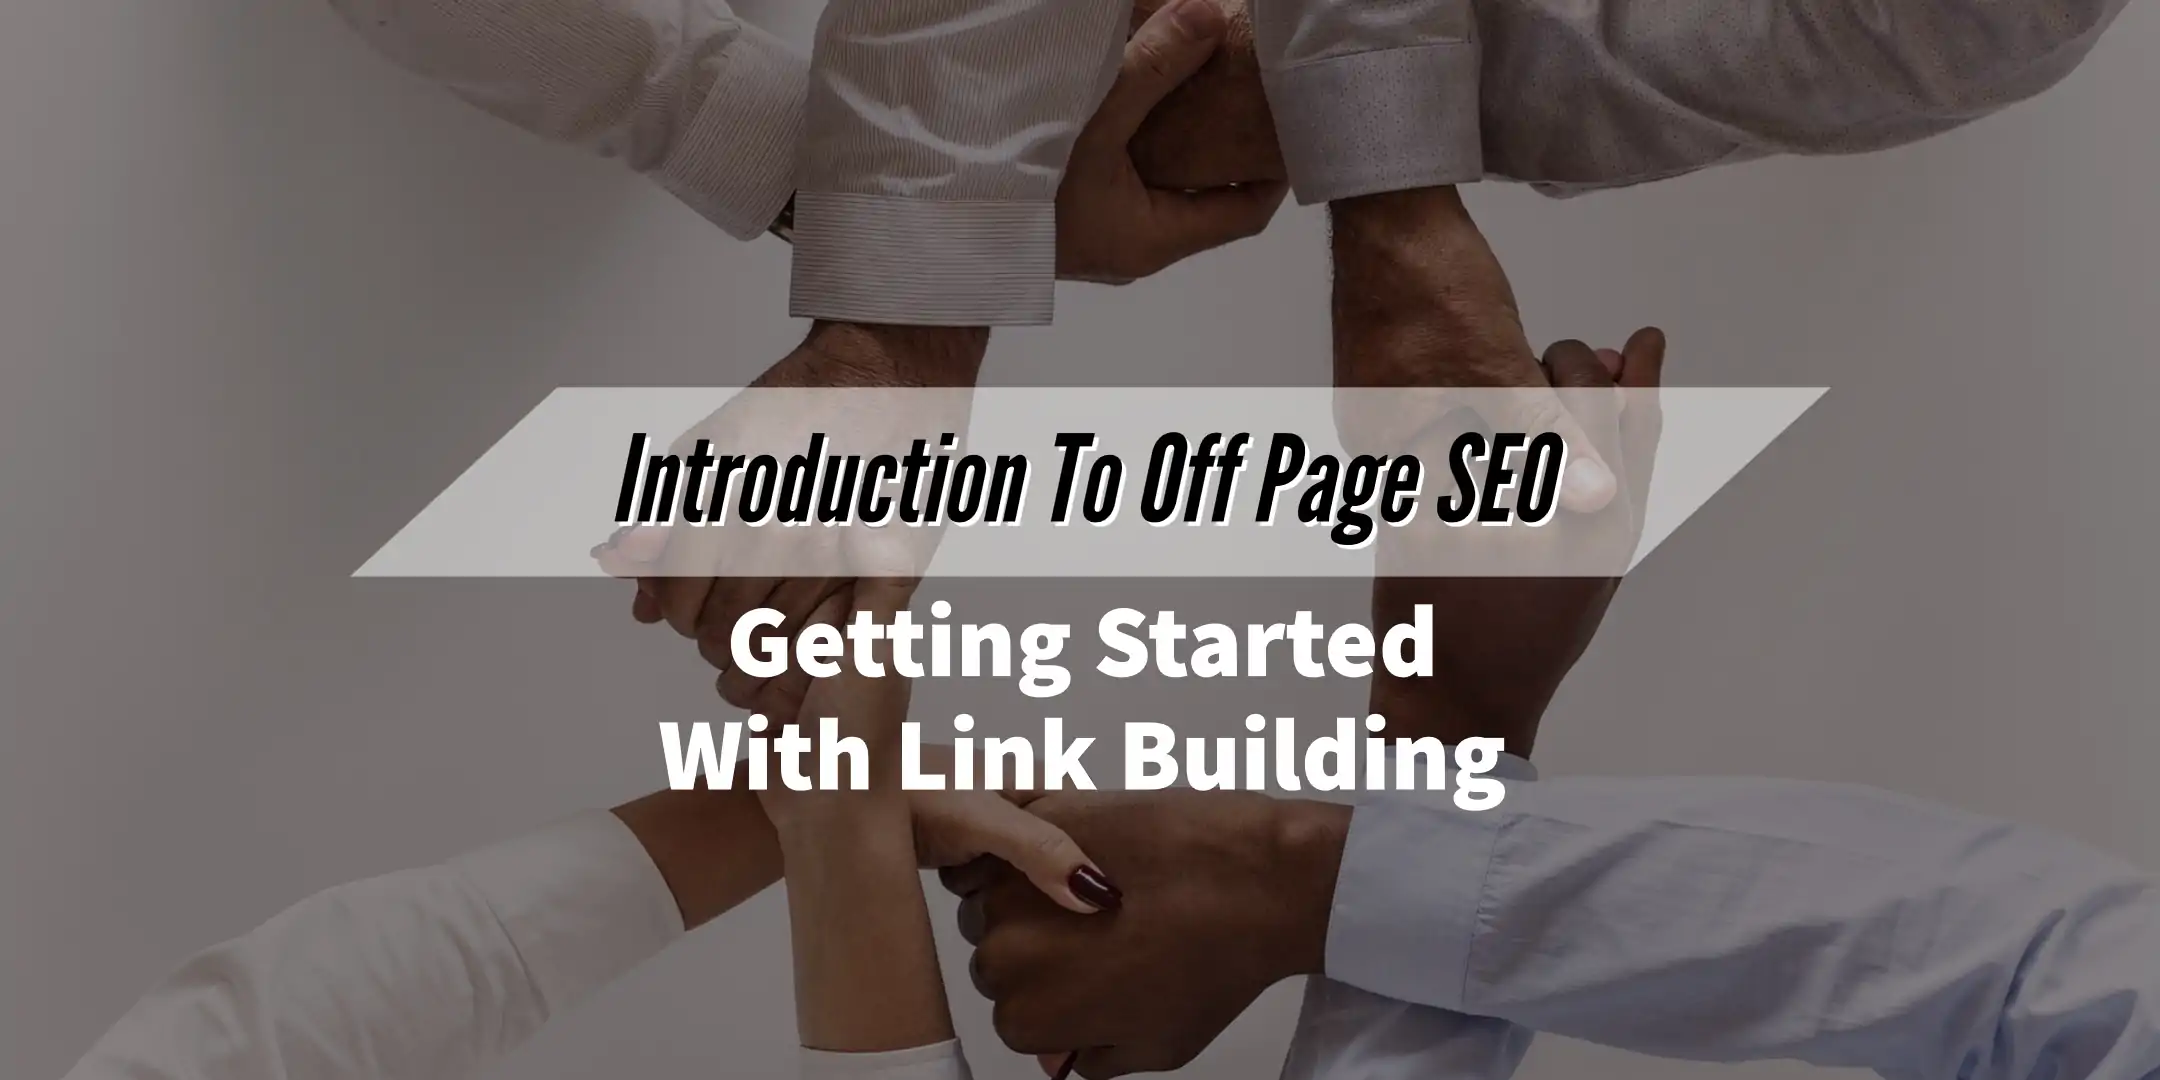 Introduction-To-Off-Page-SEO-Getting-Started-With-Link-Building